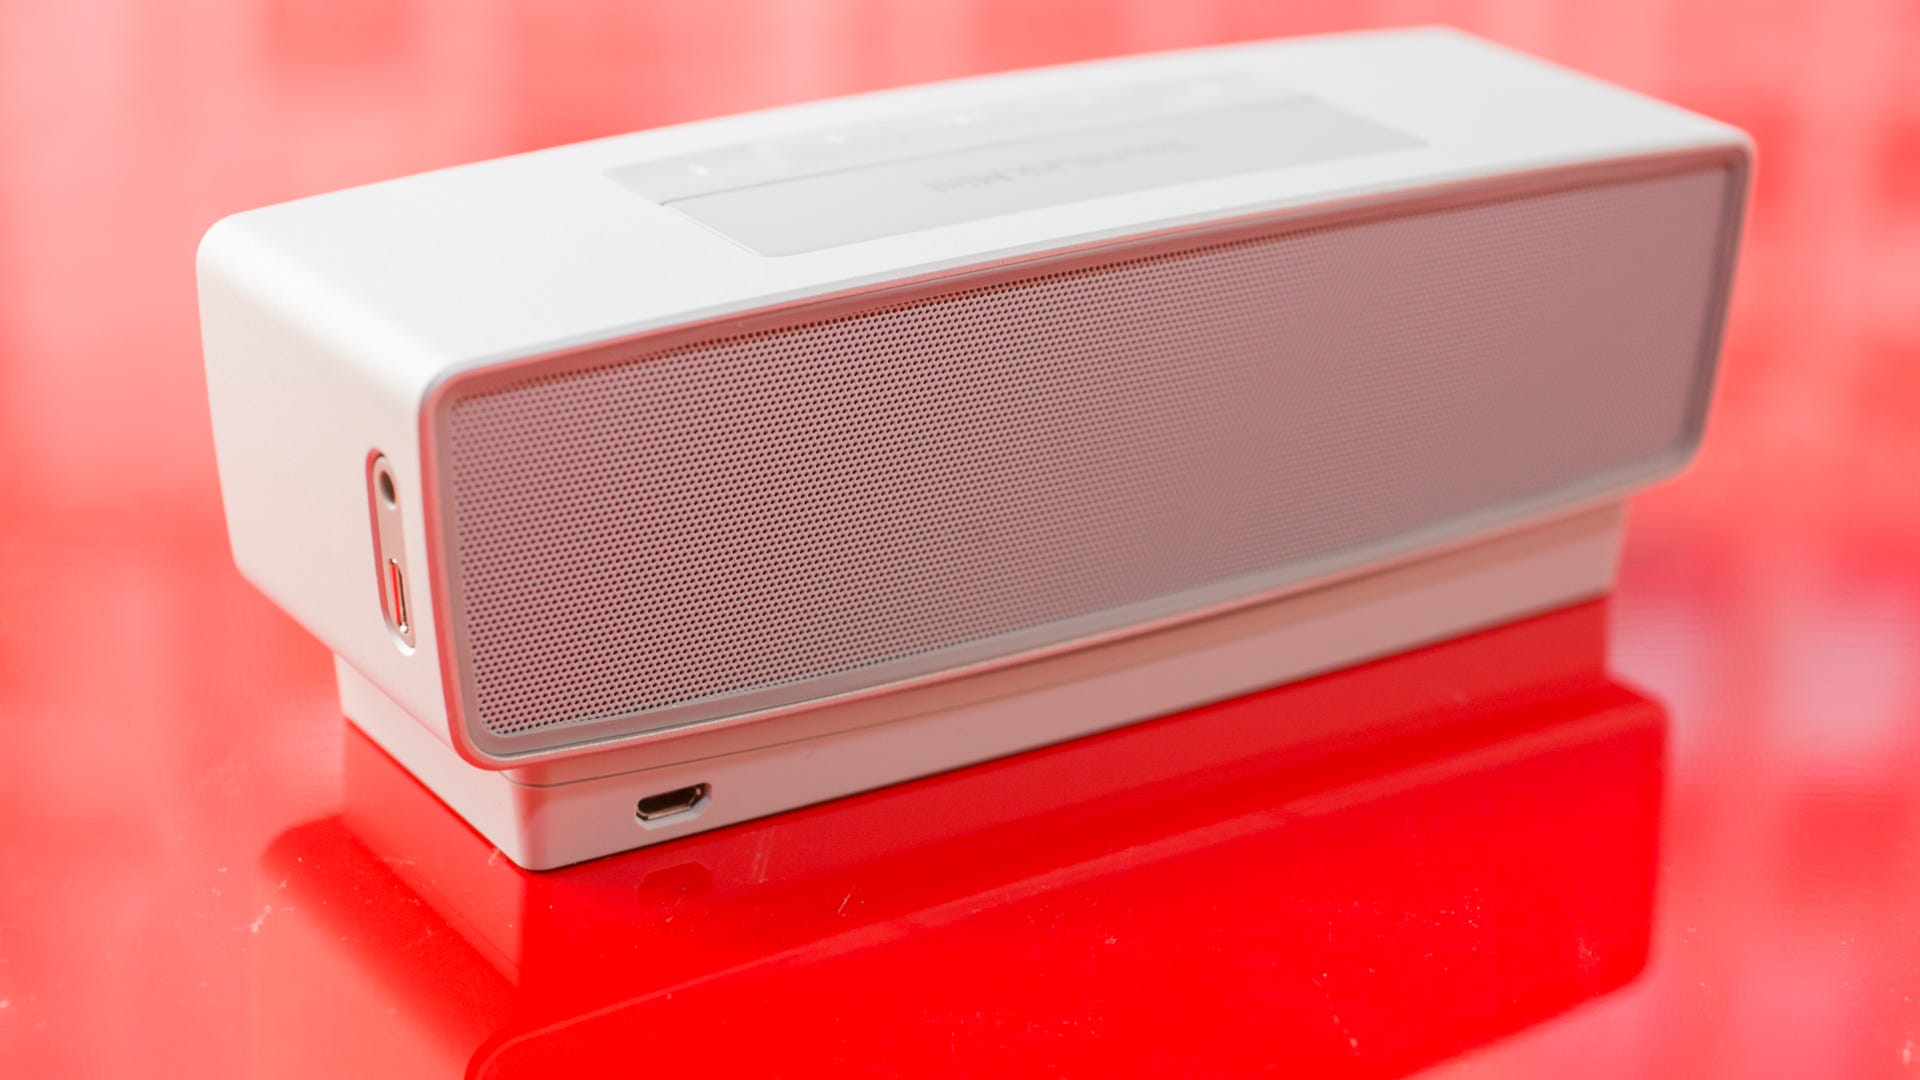 Bose SoundLink Mini review: A great even better - CNET